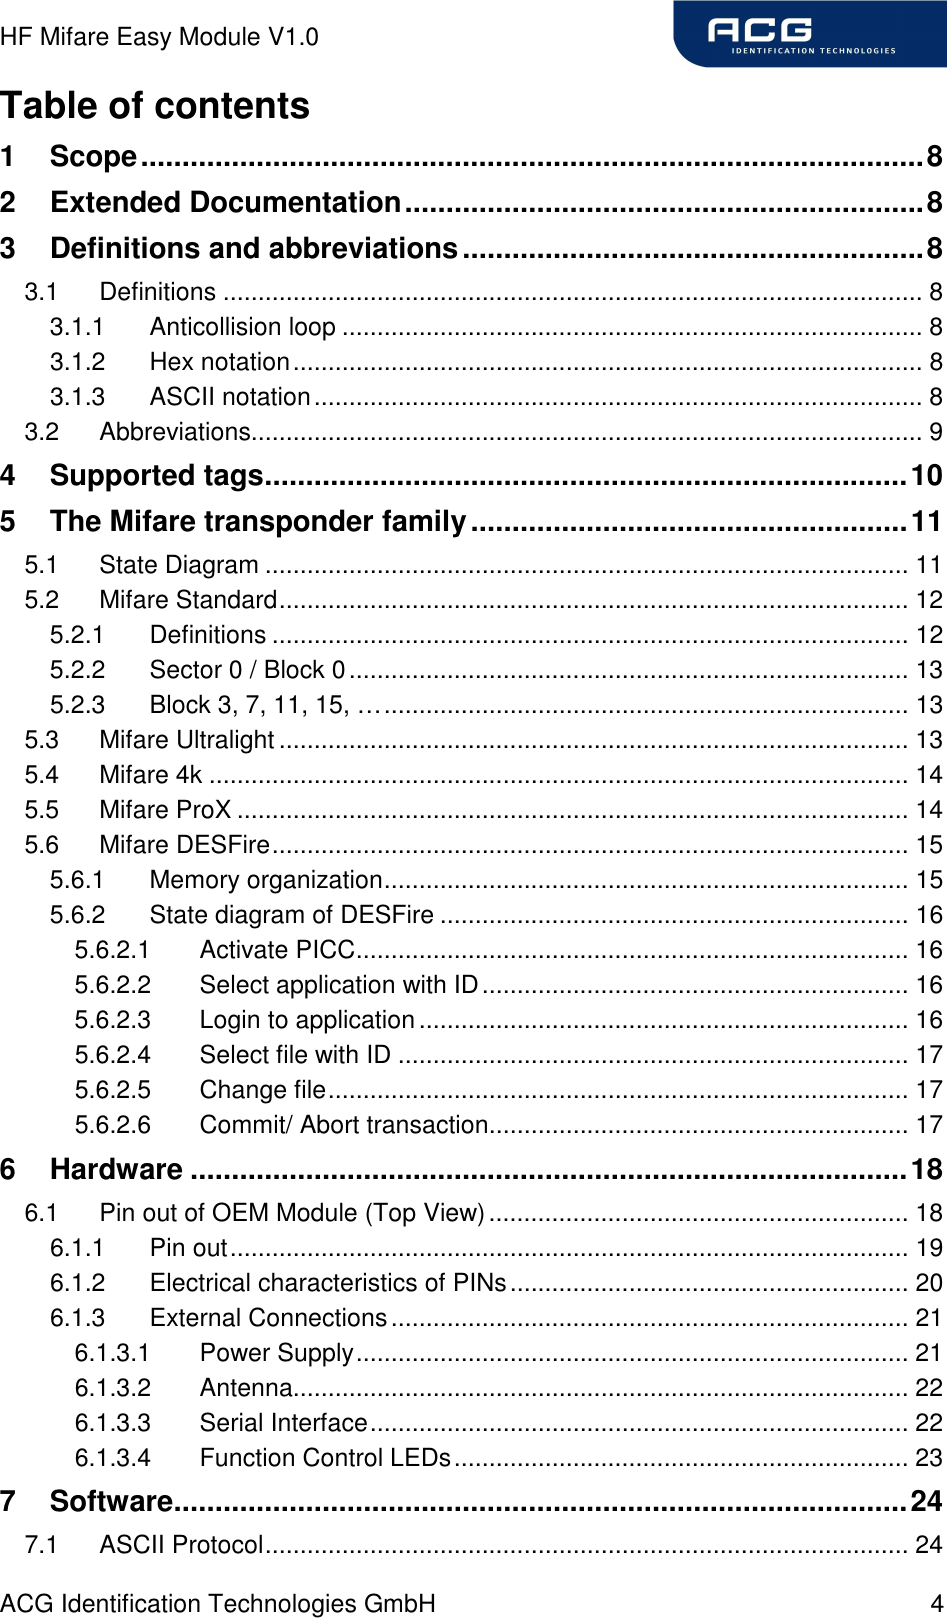 HF Mifare Easy Module V1.0 ACG Identification Technologies GmbH  4 Table of contents 1 Scope...............................................................................................8 2 Extended Documentation...............................................................8 3 Definitions and abbreviations........................................................8 3.1 Definitions .................................................................................................... 8 3.1.1 Anticollision loop ................................................................................... 8 3.1.2 Hex notation.......................................................................................... 8 3.1.3 ASCII notation....................................................................................... 8 3.2 Abbreviations................................................................................................ 9 4 Supported tags..............................................................................10 5 The Mifare transponder family.....................................................11 5.1 State Diagram ............................................................................................ 11 5.2 Mifare Standard.......................................................................................... 12 5.2.1 Definitions ........................................................................................... 12 5.2.2 Sector 0 / Block 0................................................................................ 13 5.2.3 Block 3, 7, 11, 15, …........................................................................... 13 5.3 Mifare Ultralight .......................................................................................... 13 5.4 Mifare 4k .................................................................................................... 14 5.5 Mifare ProX ................................................................................................ 14 5.6 Mifare DESFire........................................................................................... 15 5.6.1 Memory organization........................................................................... 15 5.6.2 State diagram of DESFire ................................................................... 16 5.6.2.1 Activate PICC............................................................................... 16 5.6.2.2 Select application with ID............................................................. 16 5.6.2.3 Login to application...................................................................... 16 5.6.2.4 Select file with ID ......................................................................... 17 5.6.2.5 Change file................................................................................... 17 5.6.2.6 Commit/ Abort transaction............................................................ 17 6 Hardware .......................................................................................18 6.1 Pin out of OEM Module (Top View)............................................................ 18 6.1.1 Pin out................................................................................................. 19 6.1.2 Electrical characteristics of PINs......................................................... 20 6.1.3 External Connections.......................................................................... 21 6.1.3.1 Power Supply............................................................................... 21 6.1.3.2 Antenna........................................................................................ 22 6.1.3.3 Serial Interface............................................................................. 22 6.1.3.4 Function Control LEDs................................................................. 23 7 Software.........................................................................................24 7.1 ASCII Protocol............................................................................................ 24 